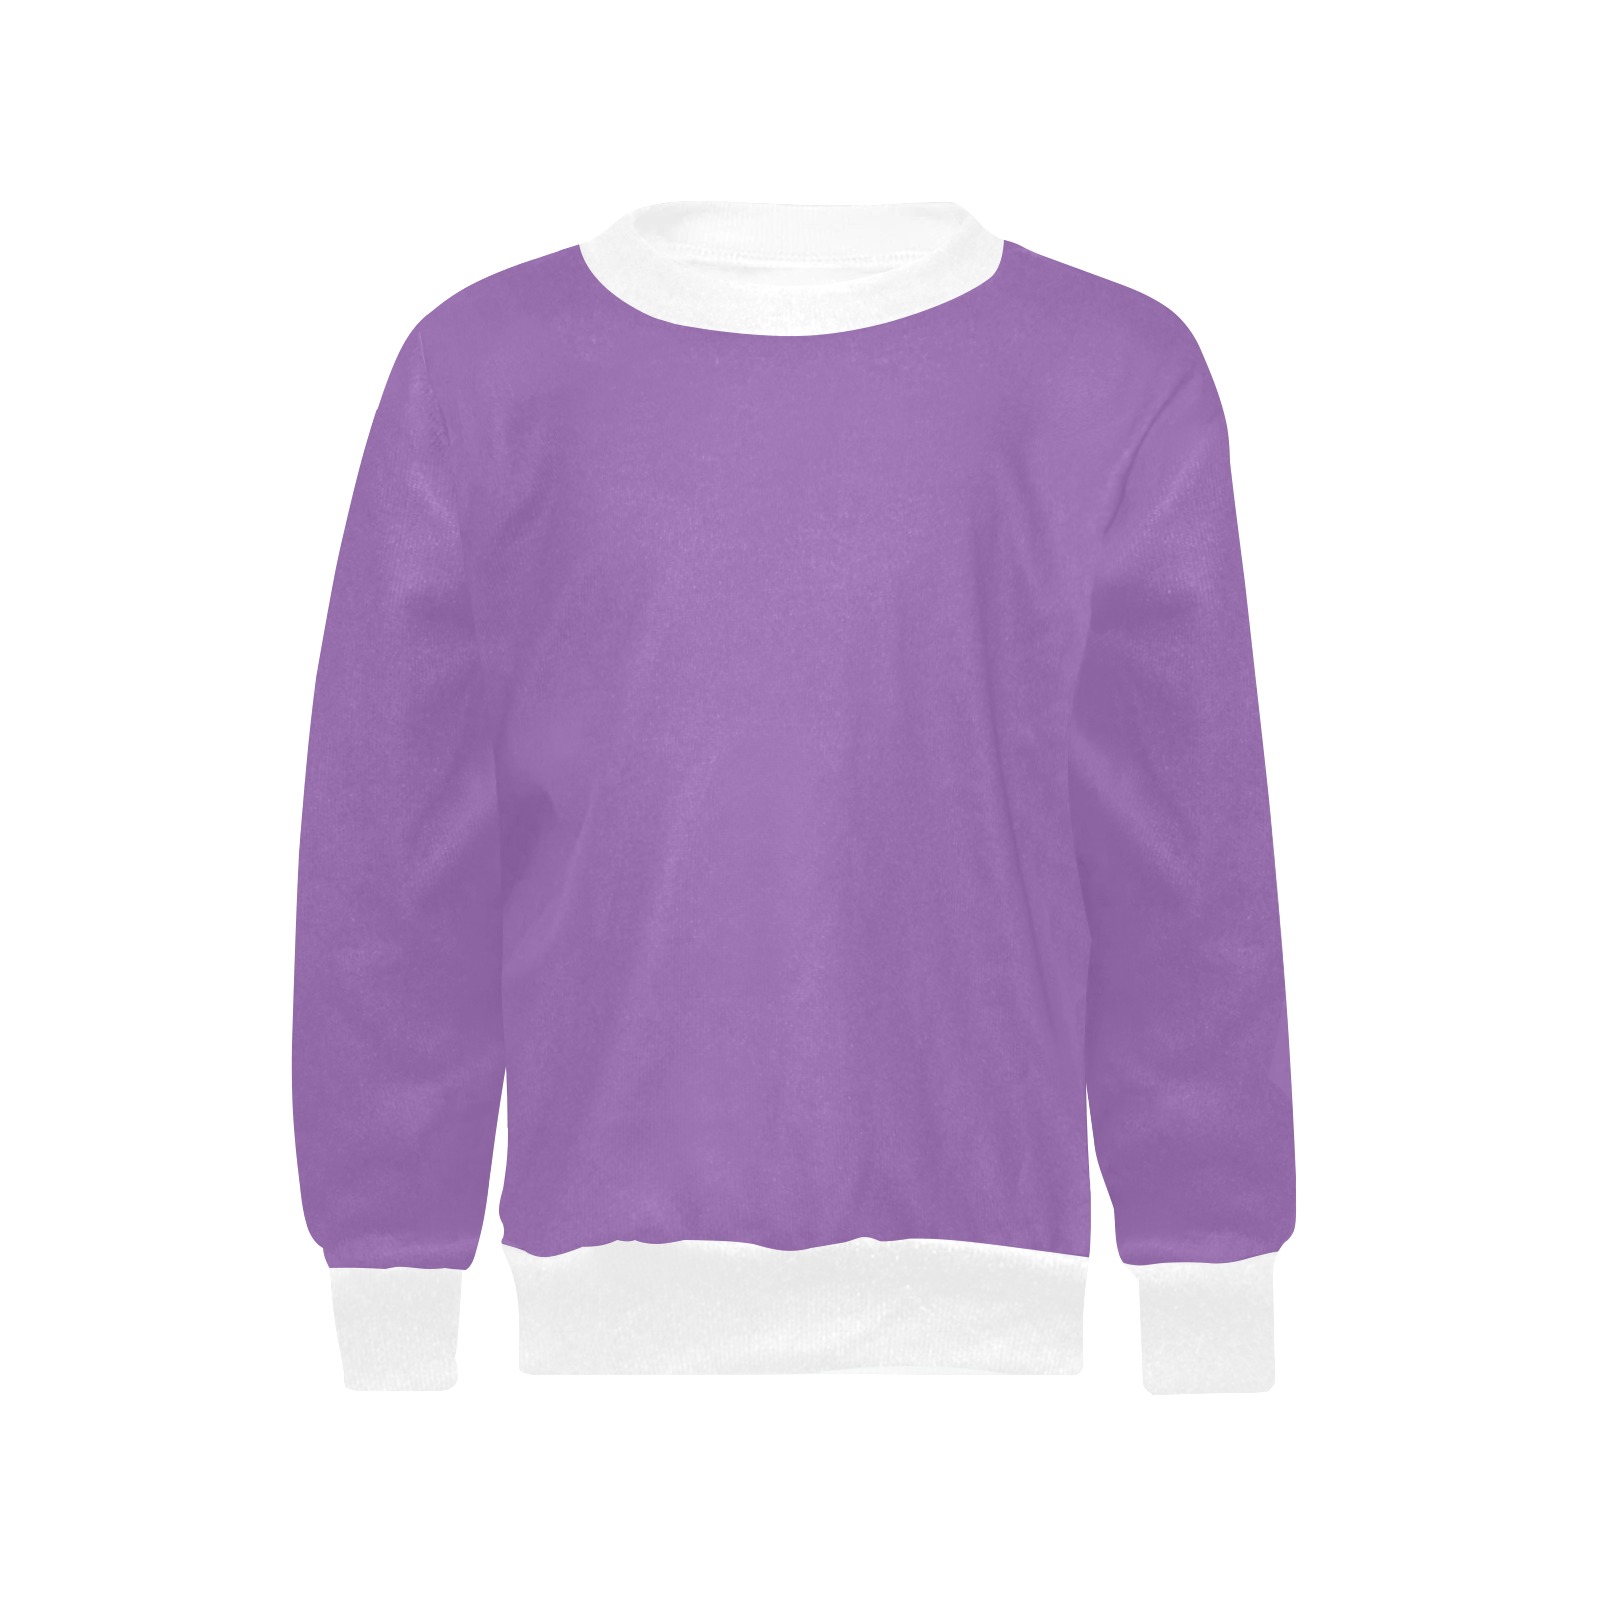 Amethyst Orchid Girls' All Over Print Crew Neck Sweater (Model H49)